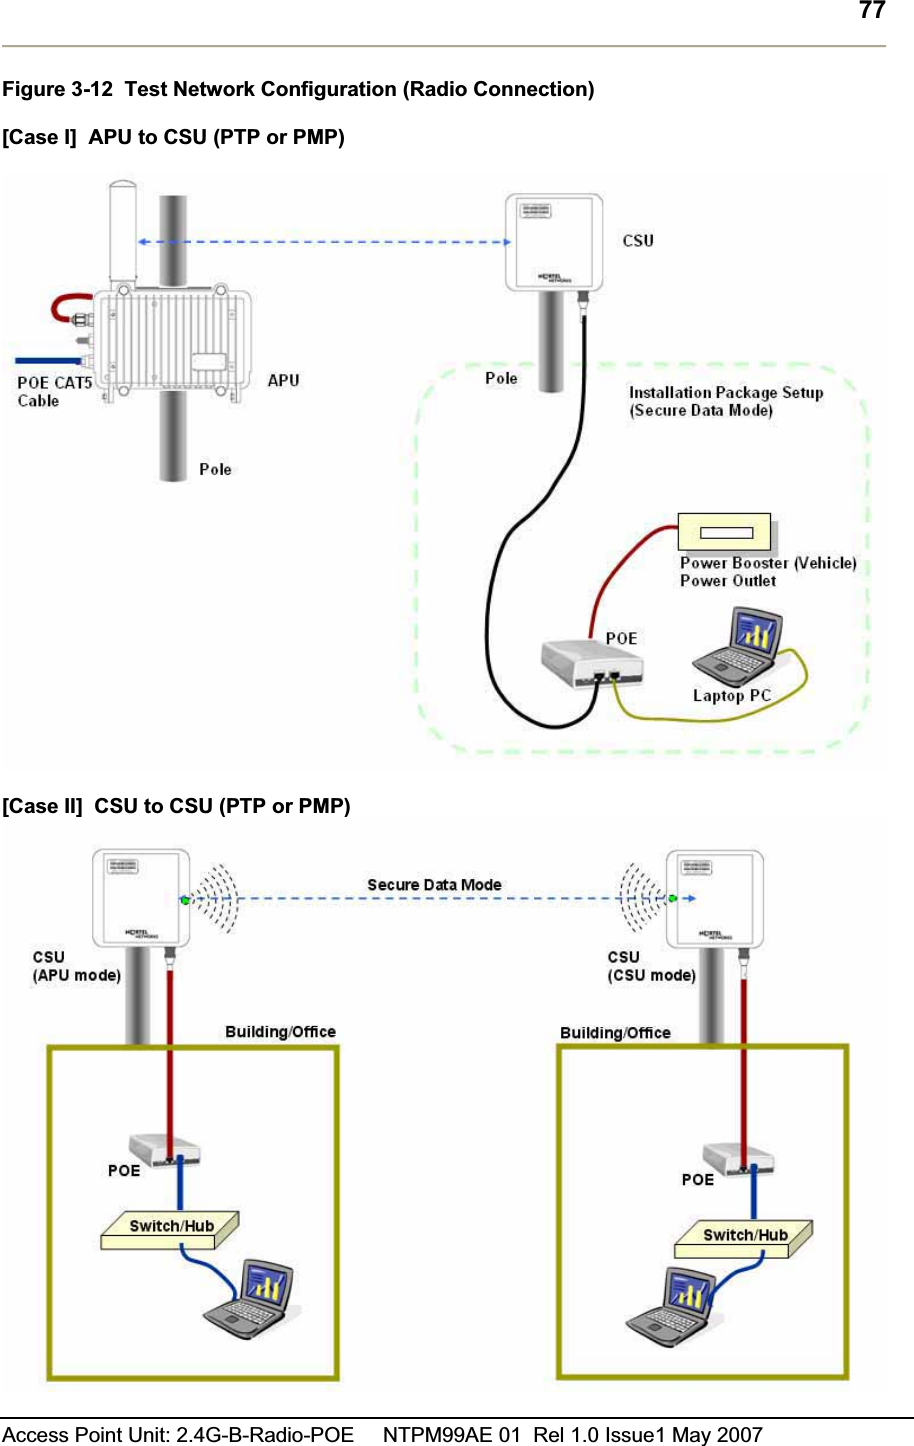 77Access Point Unit: 2.4G-B-Radio-POE     NTPM99AE 01  Rel 1.0 Issue1 May 2007 Figure 3-12  Test Network Configuration (Radio Connection) [Case I]  APU to CSU (PTP or PMP) [Case II]  CSU to CSU (PTP or PMP) 